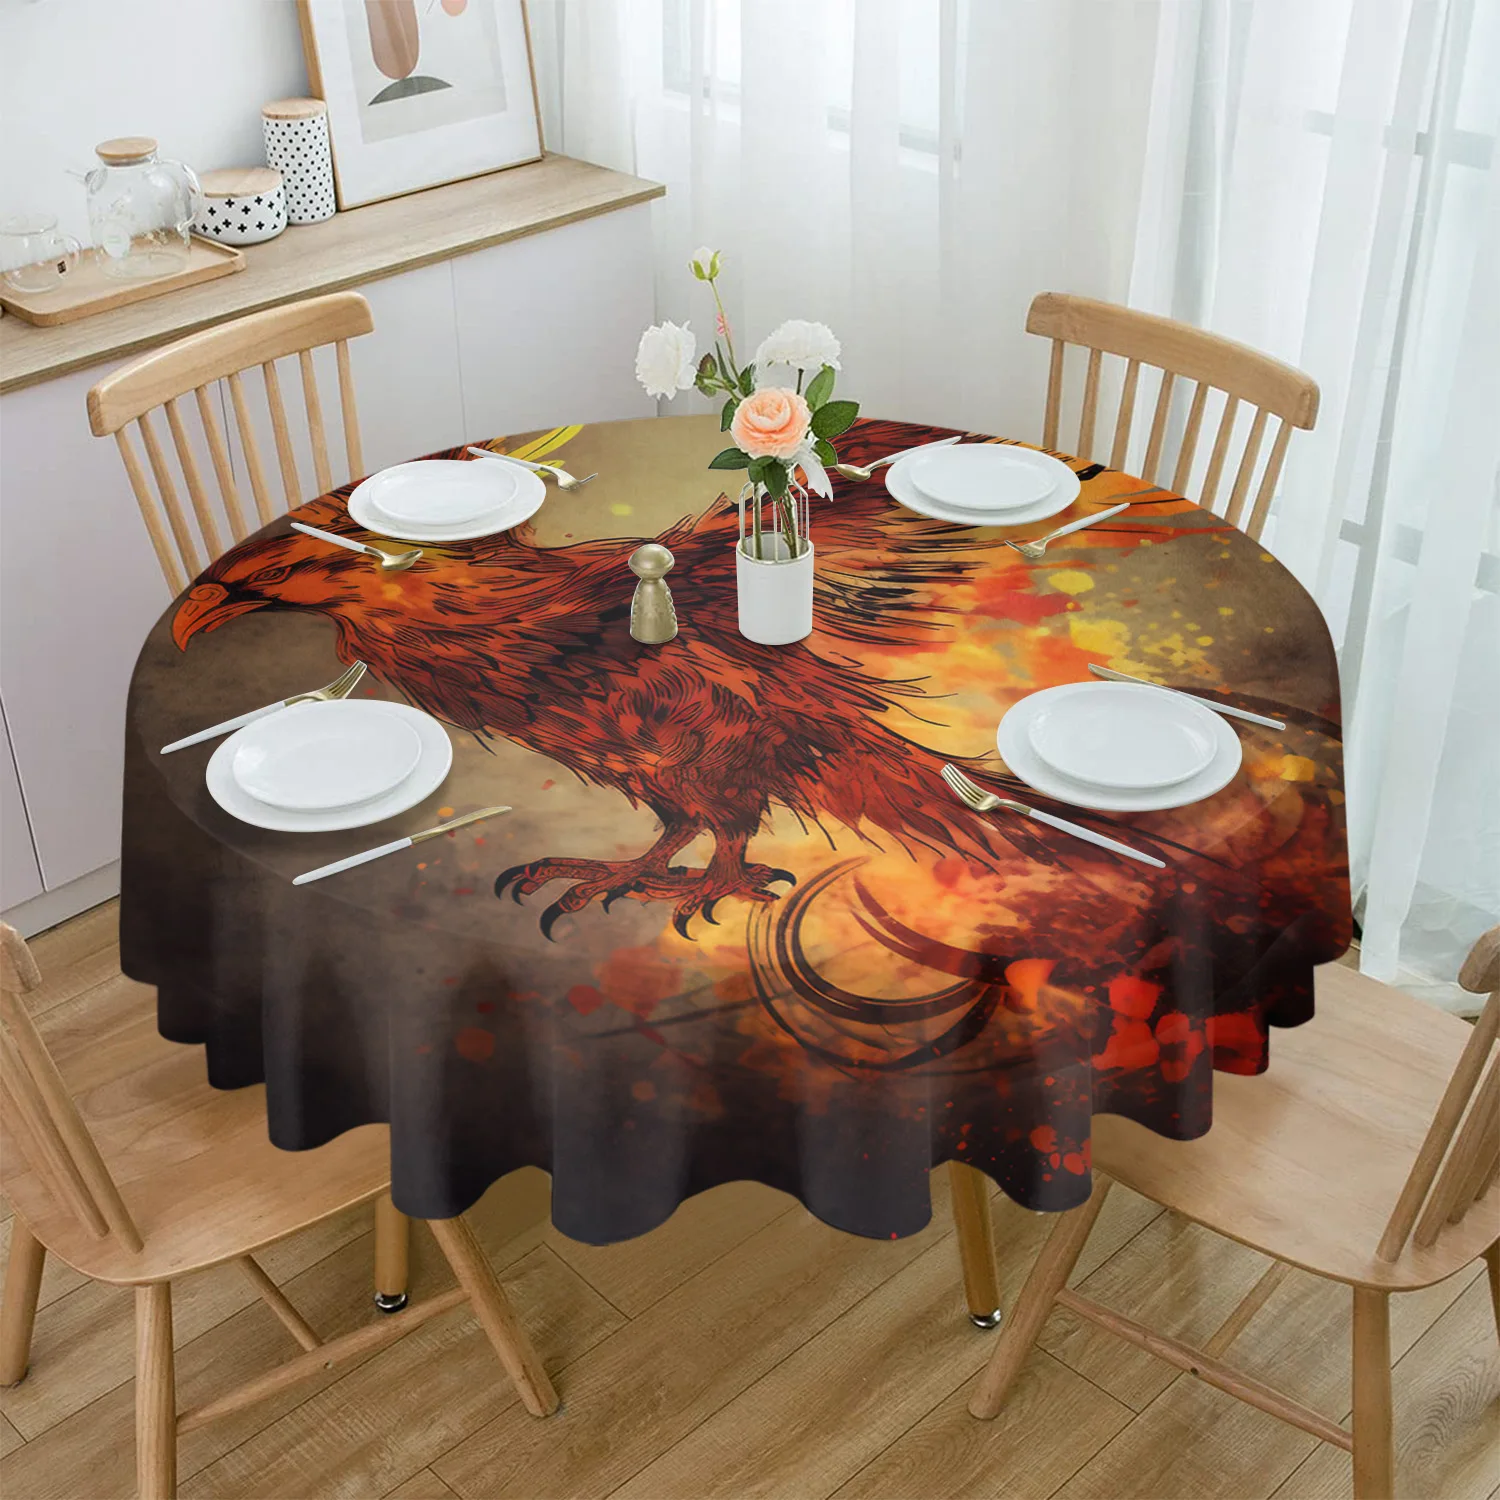 

Bird Flame Feather Round Tablecloth Party Kitchen Dinner Table Cover Holiday Decor Waterproof Tablecloths